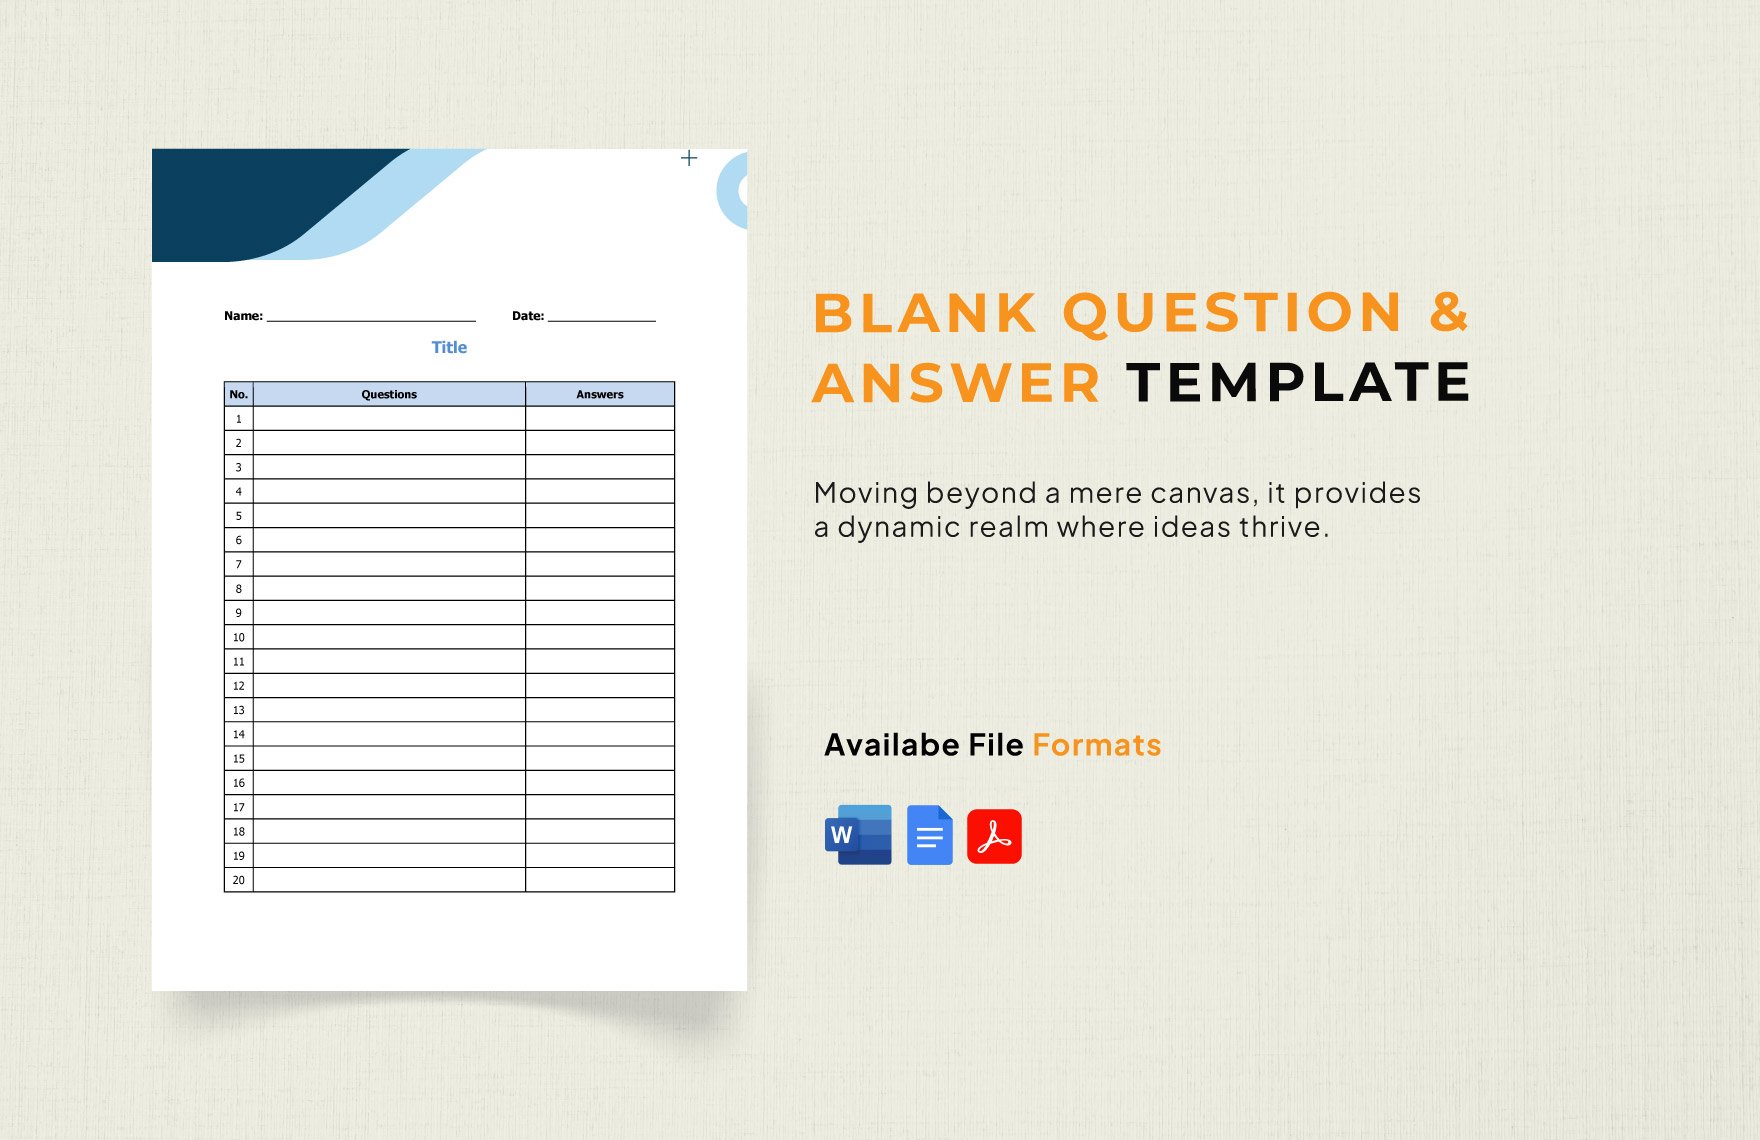 Free Blank Question & Answer Template in Word, Google Docs, PDF